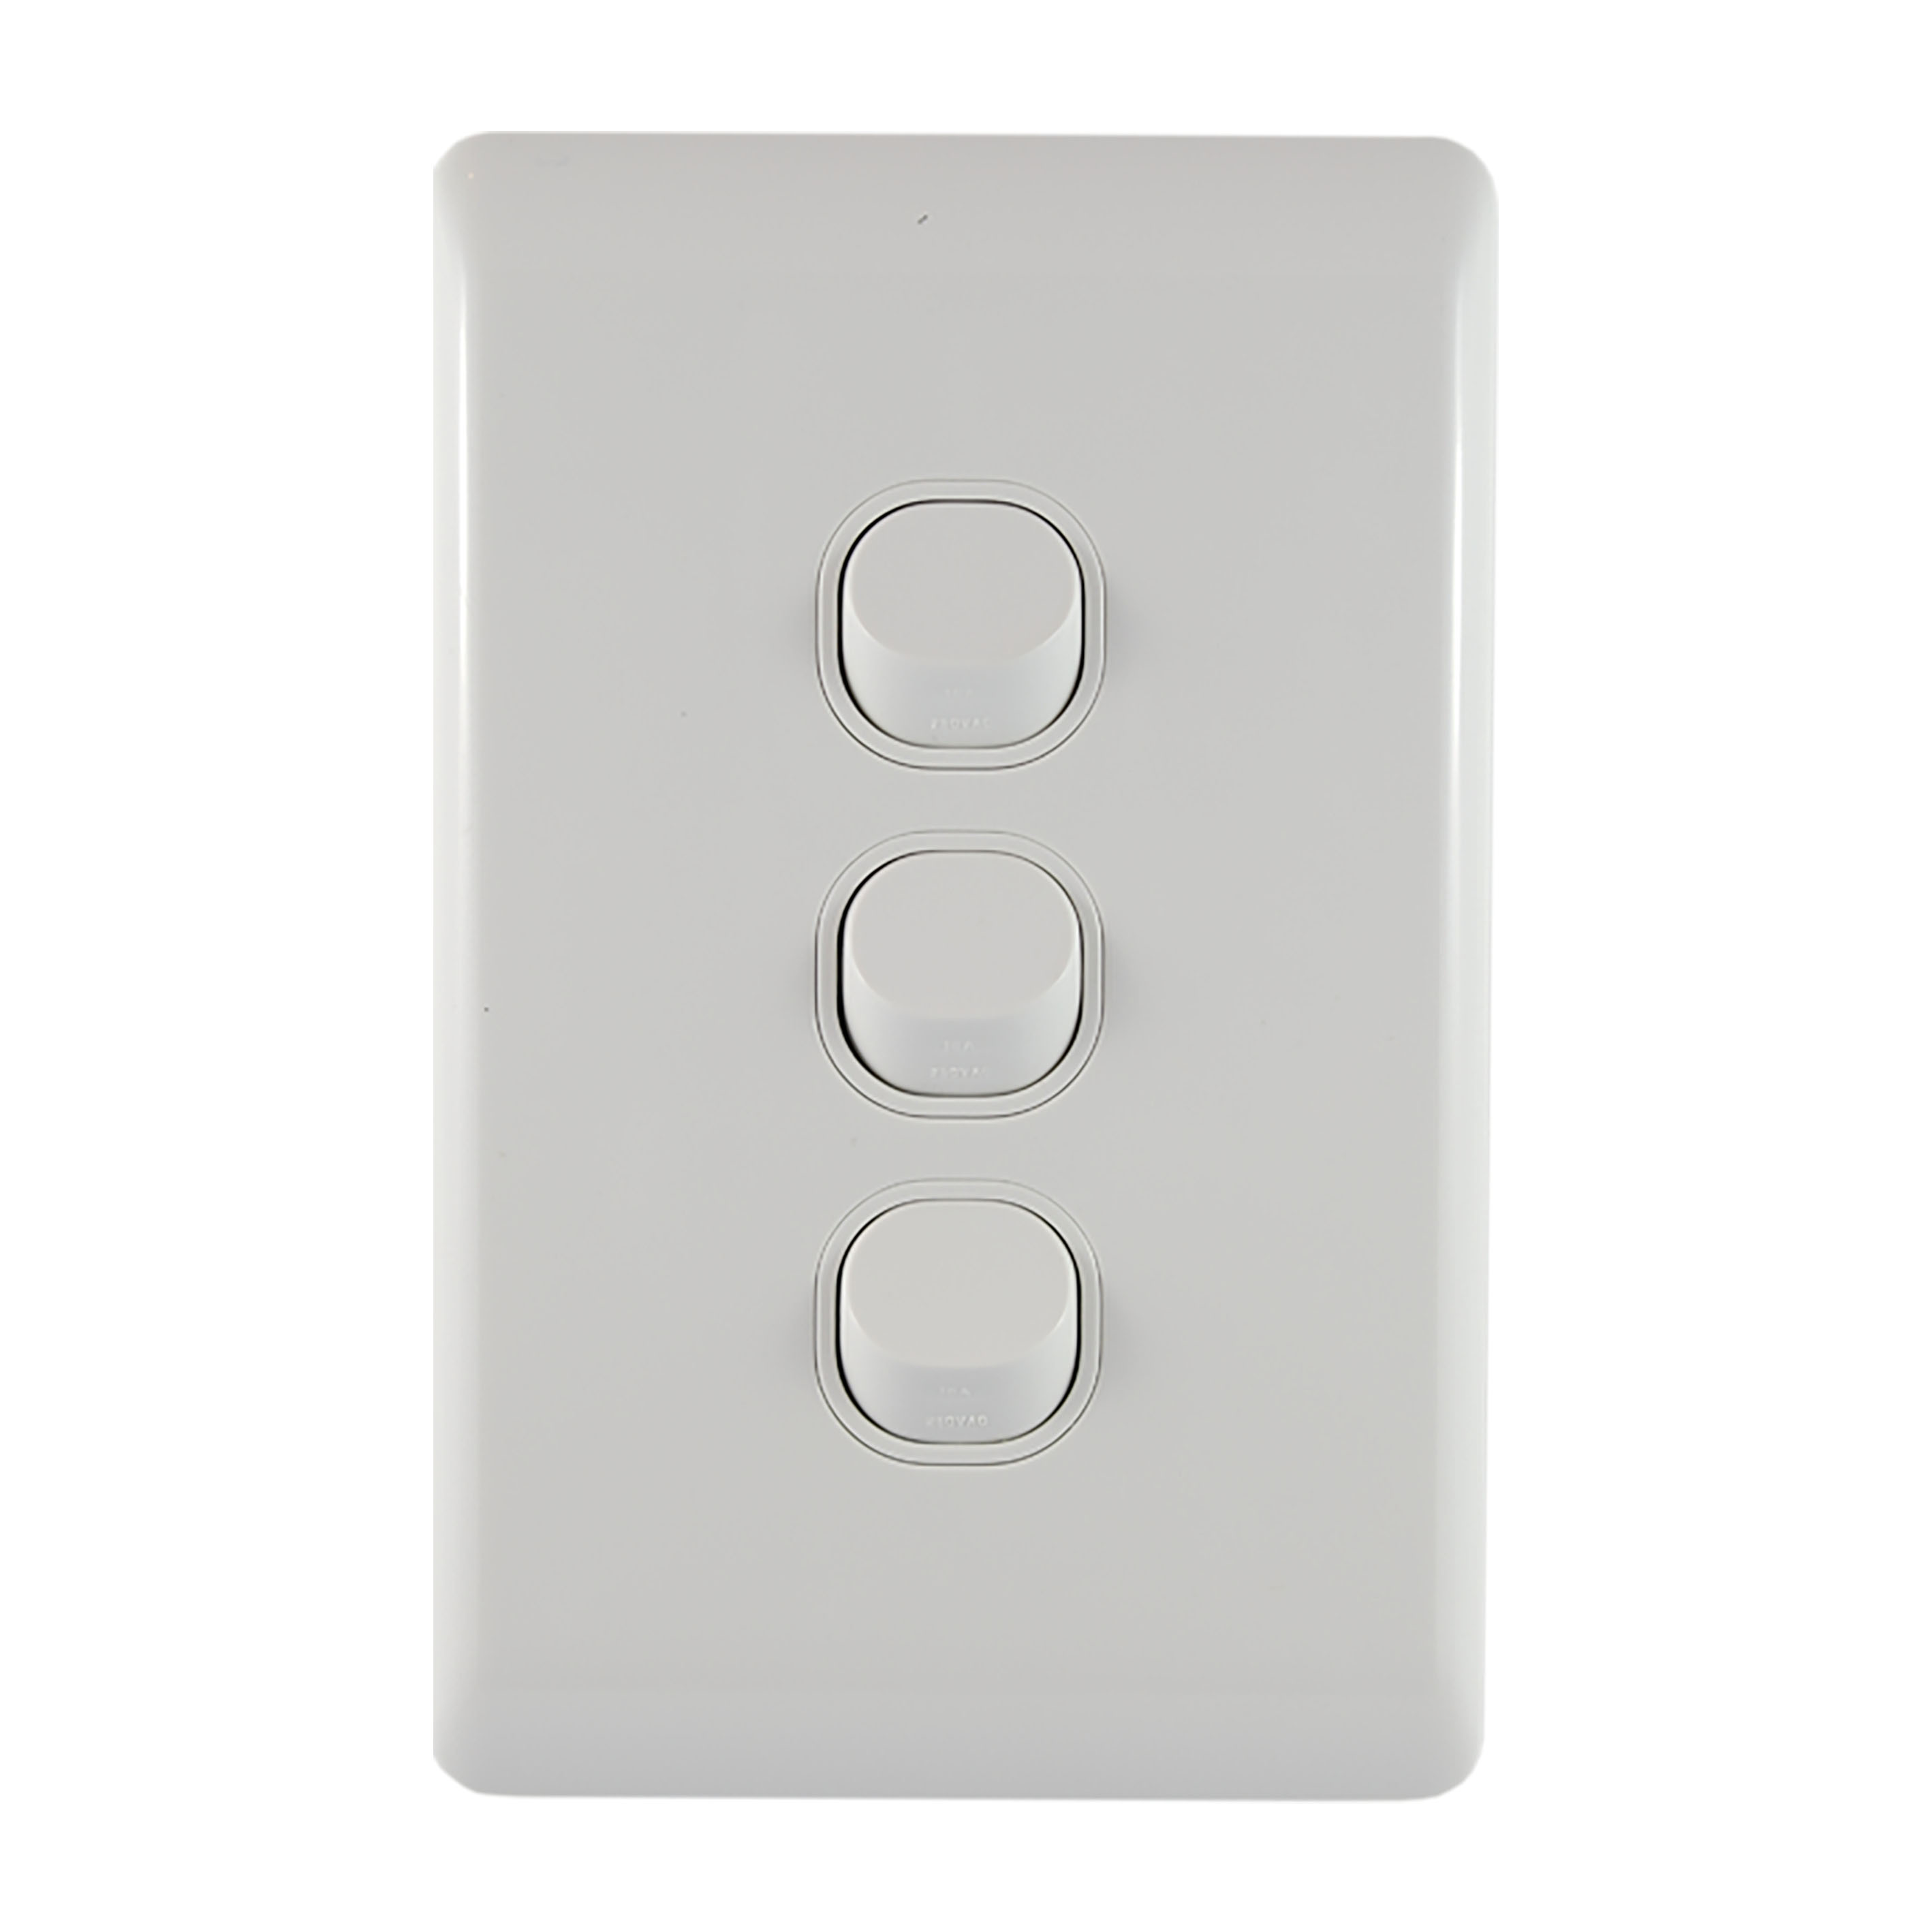 Buy a Light Switch 3 Gang VERTICAL Online in Australia from ...